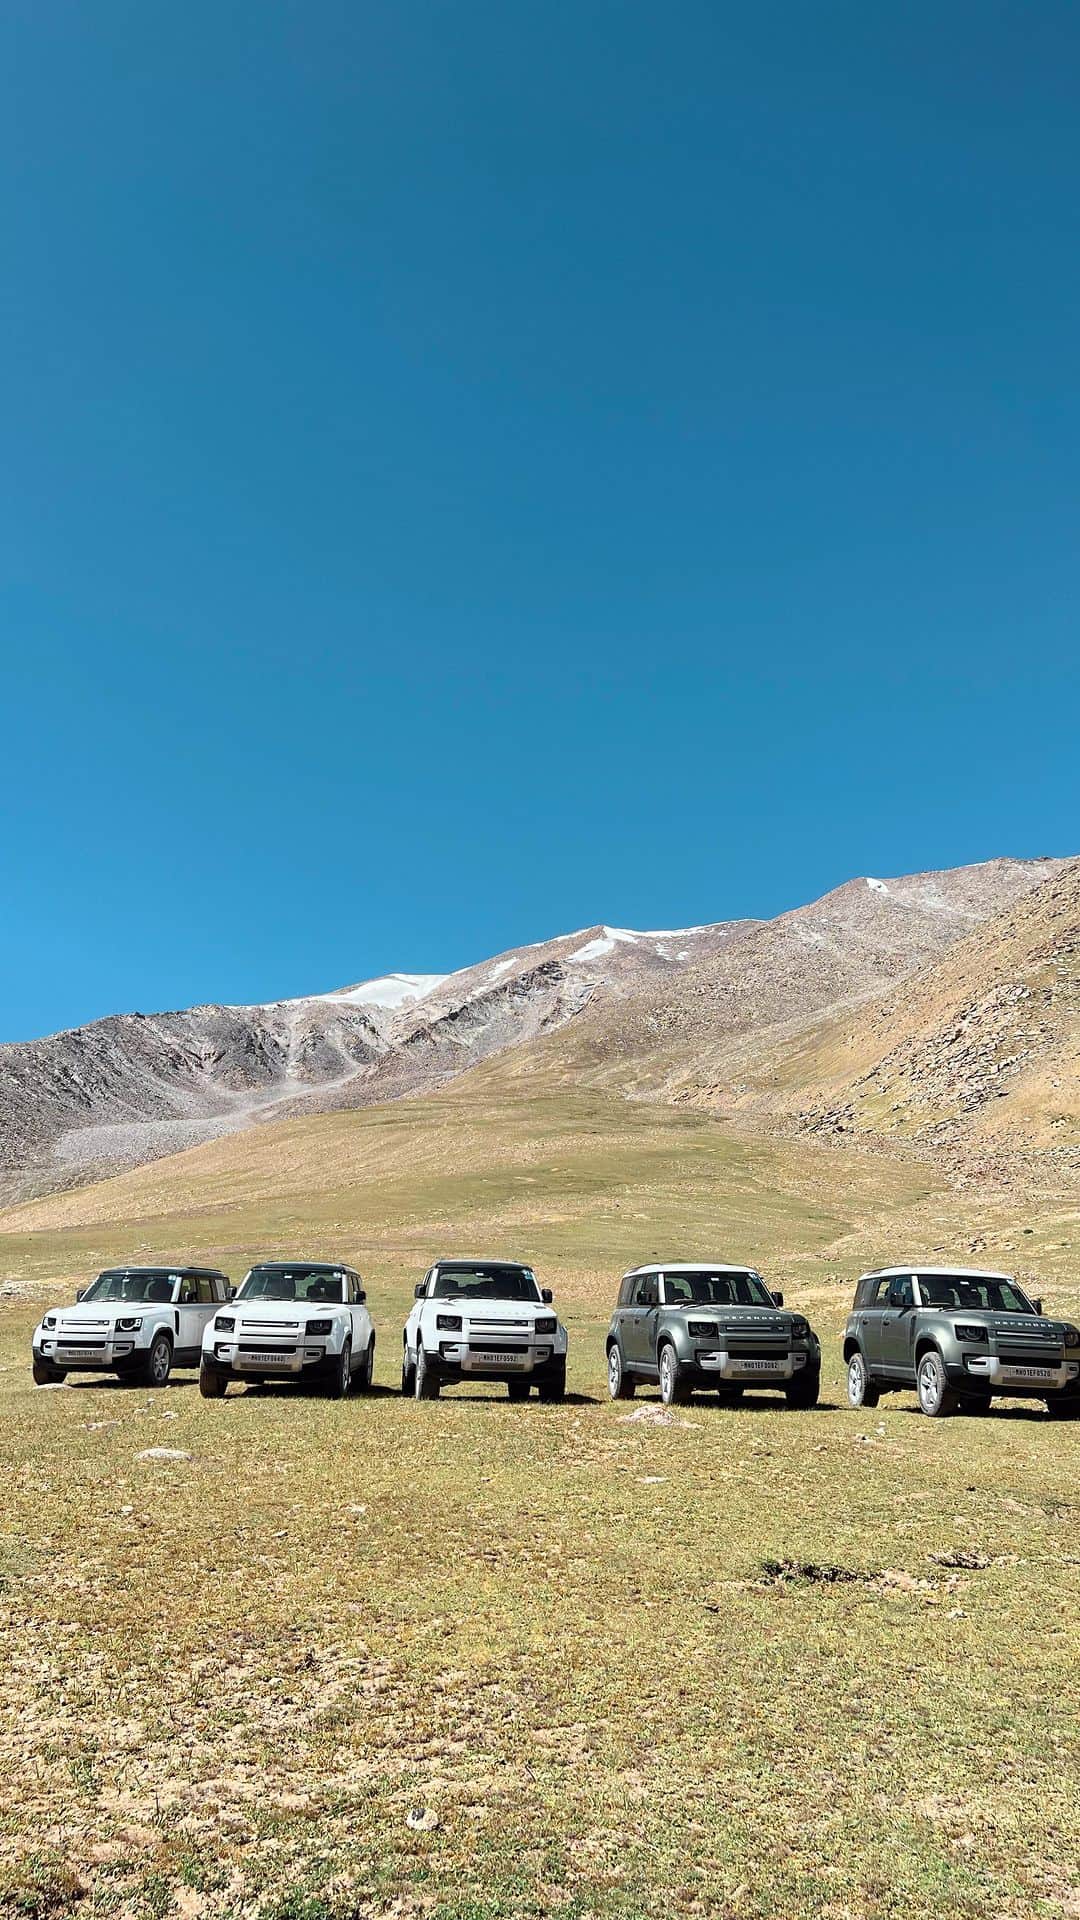 Aakriti Ranaのインスタグラム：「Haha the attention a bunch of Defenders moving together were getting was insane!   Do you know that you can also be a part of #DefenderJourneys? Experience driving the Defender across epic landscapes, immerse in diverse local culture and halt at the best luxury stays in Ladakh. Let me know if you need the link for registration. @landrover_in @Cougar__Motorsport   Don’t forget to share this with your friends! ❤️  #CougarMotorsport #partnership #aakritirana #defender #landroverdefender #offroading #luxury #trending #luxurylifestyle #ladakh #trend #reelsindia #incredibleindia #travelblogger」